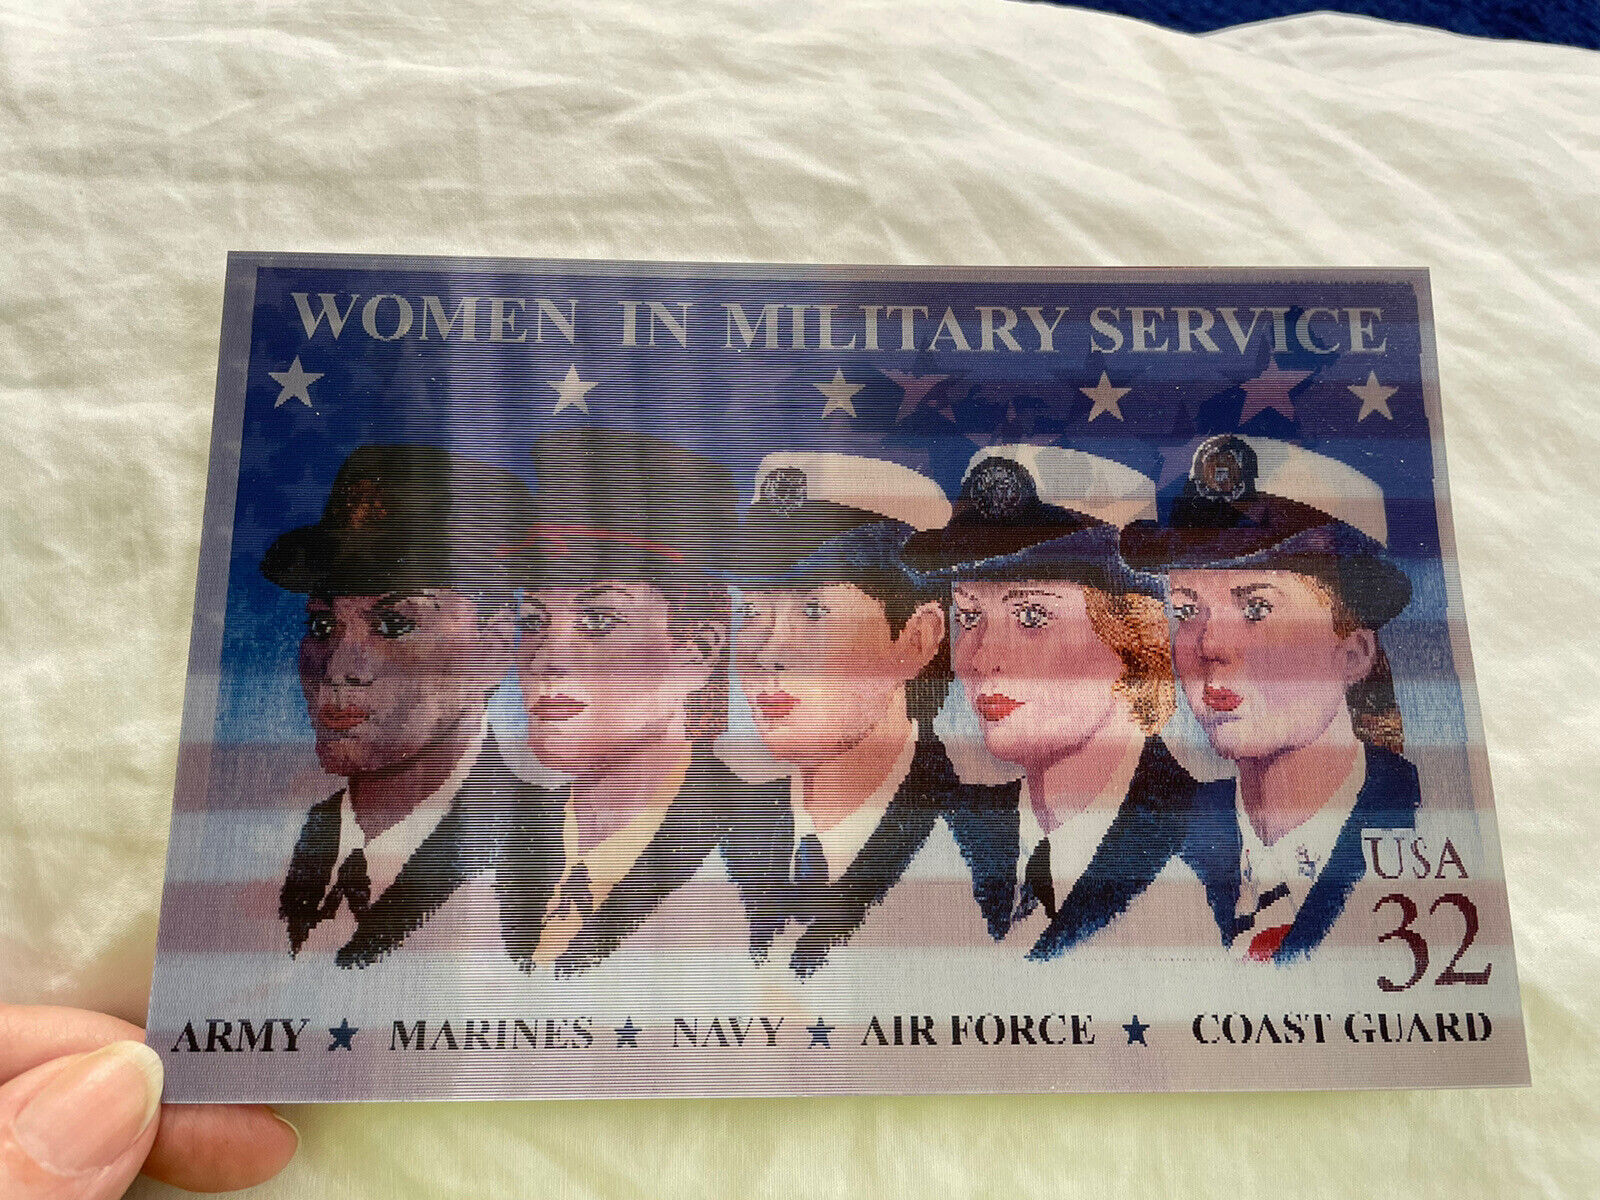 Women In Military Service Multi Image Card